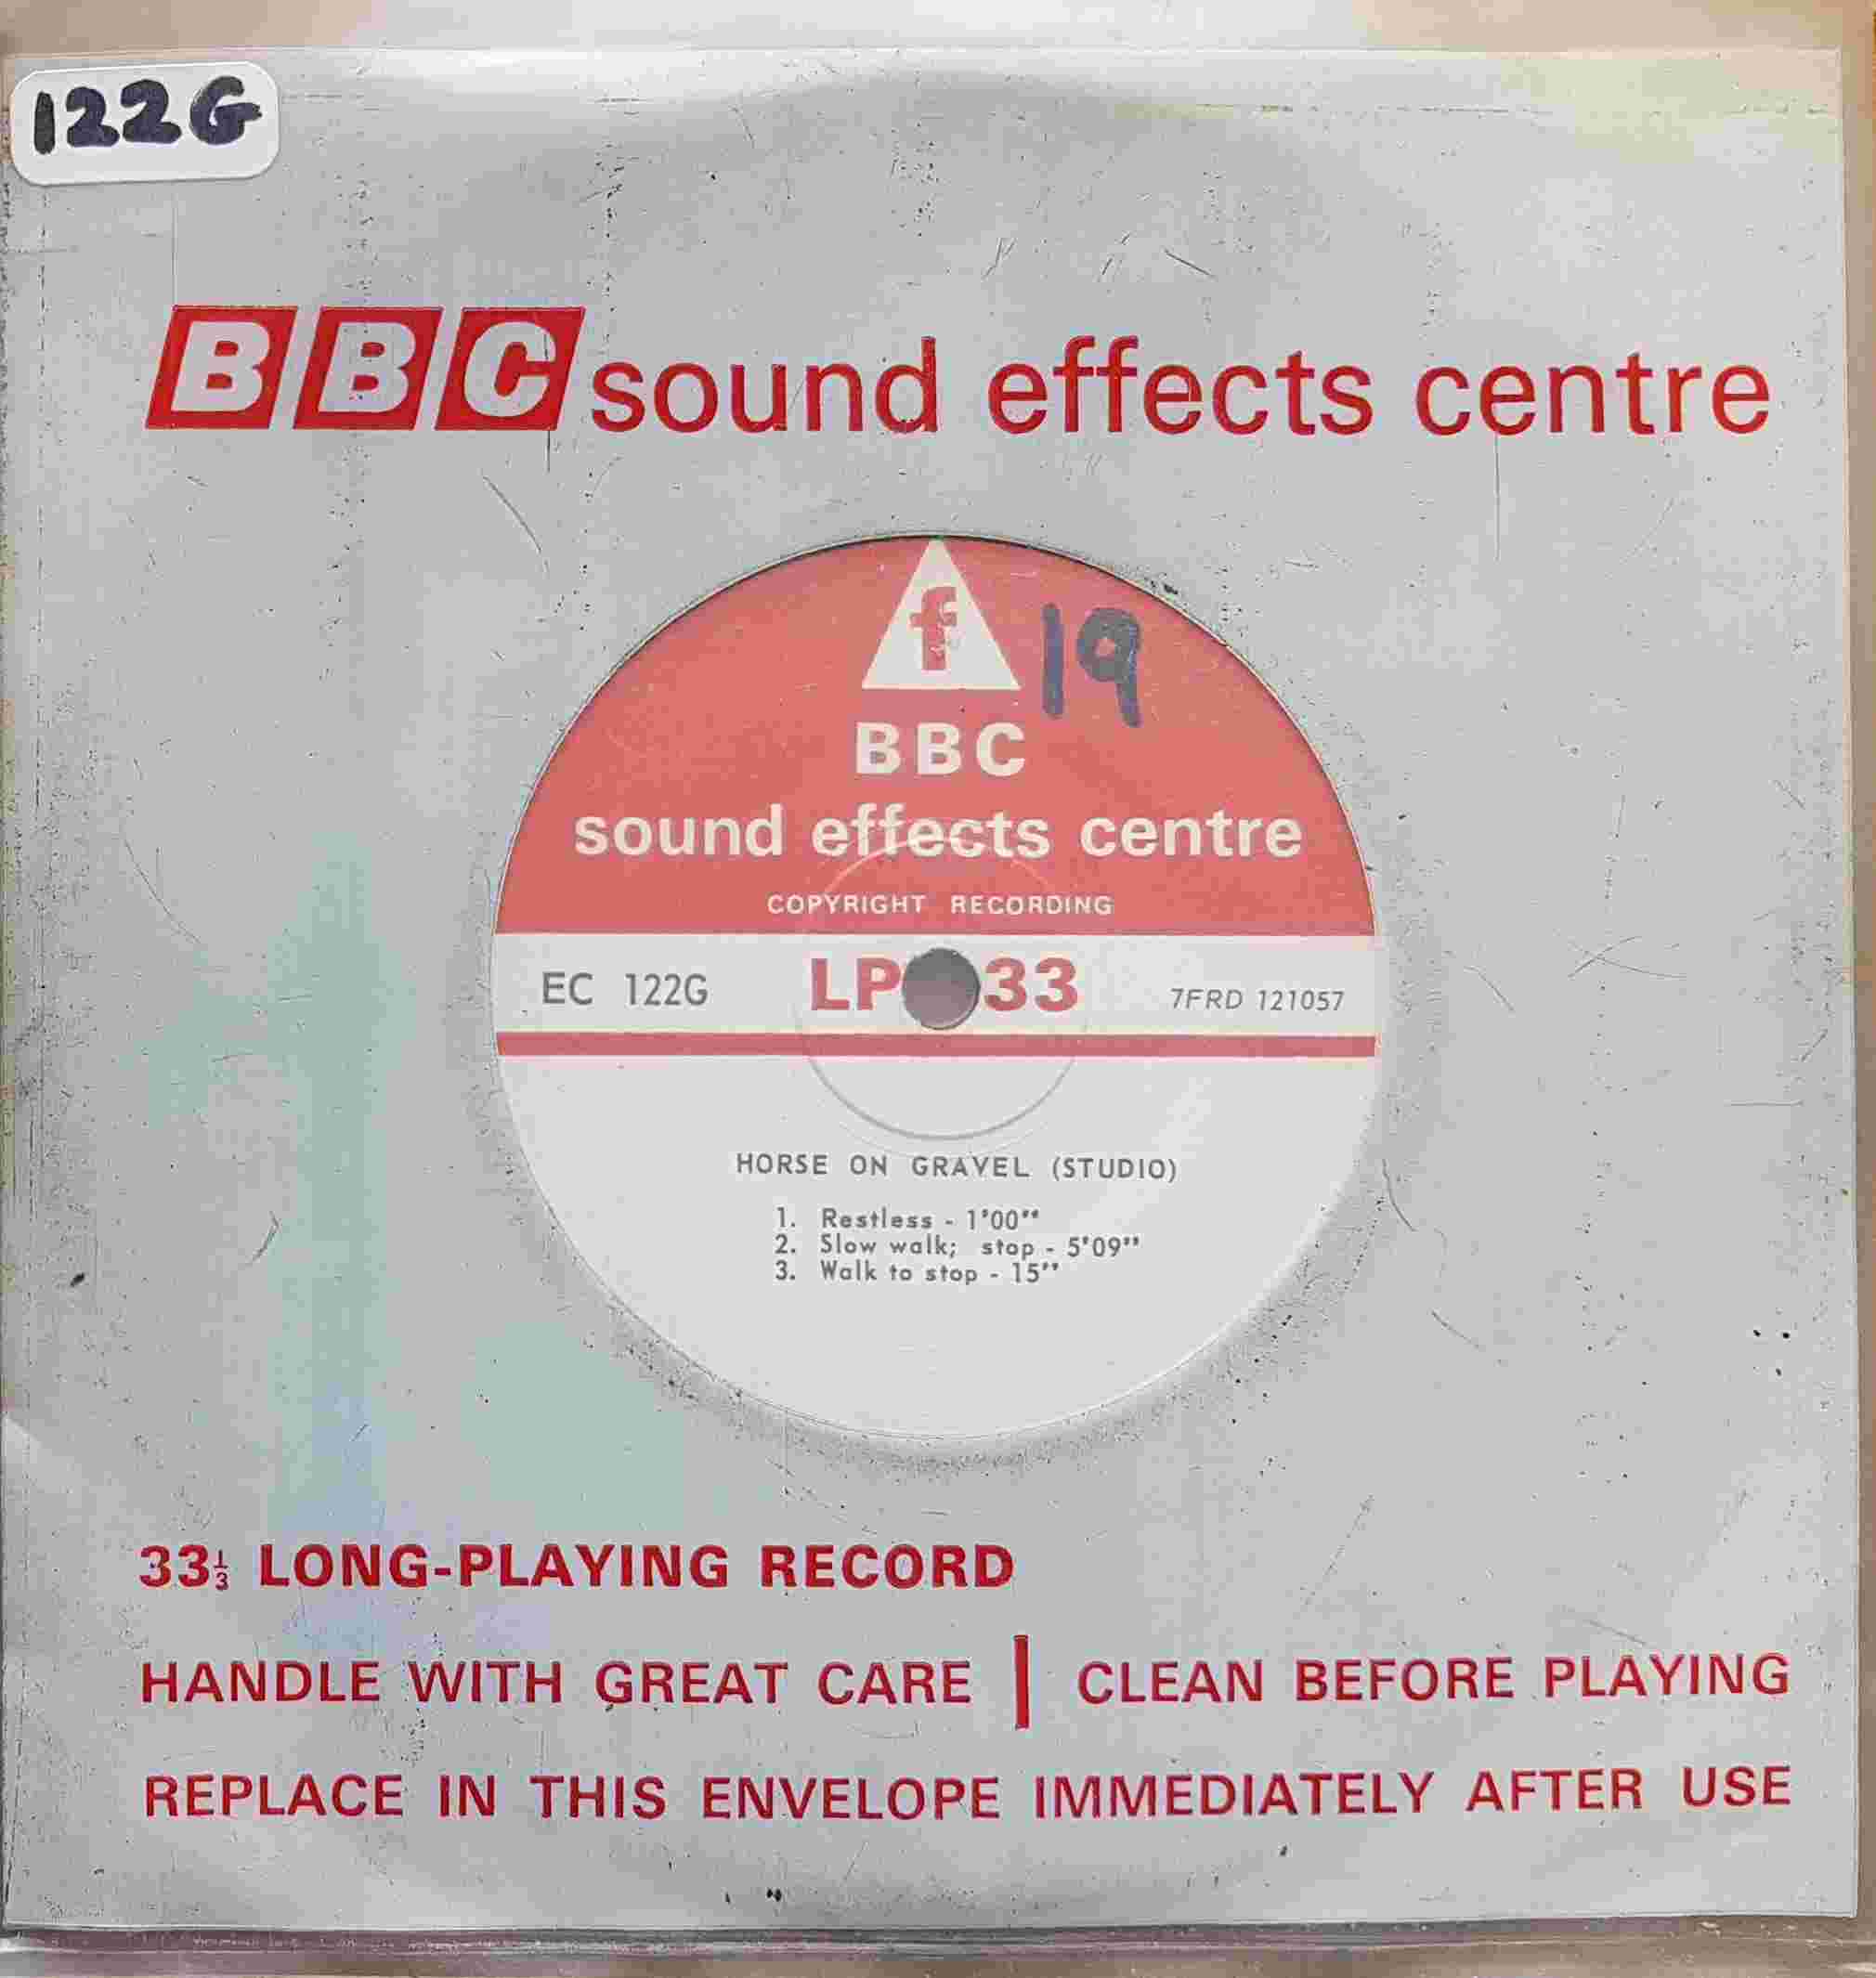 Picture of EC 122G Horse on gravel (Studio) by artist Not registered from the BBC singles - Records and Tapes library